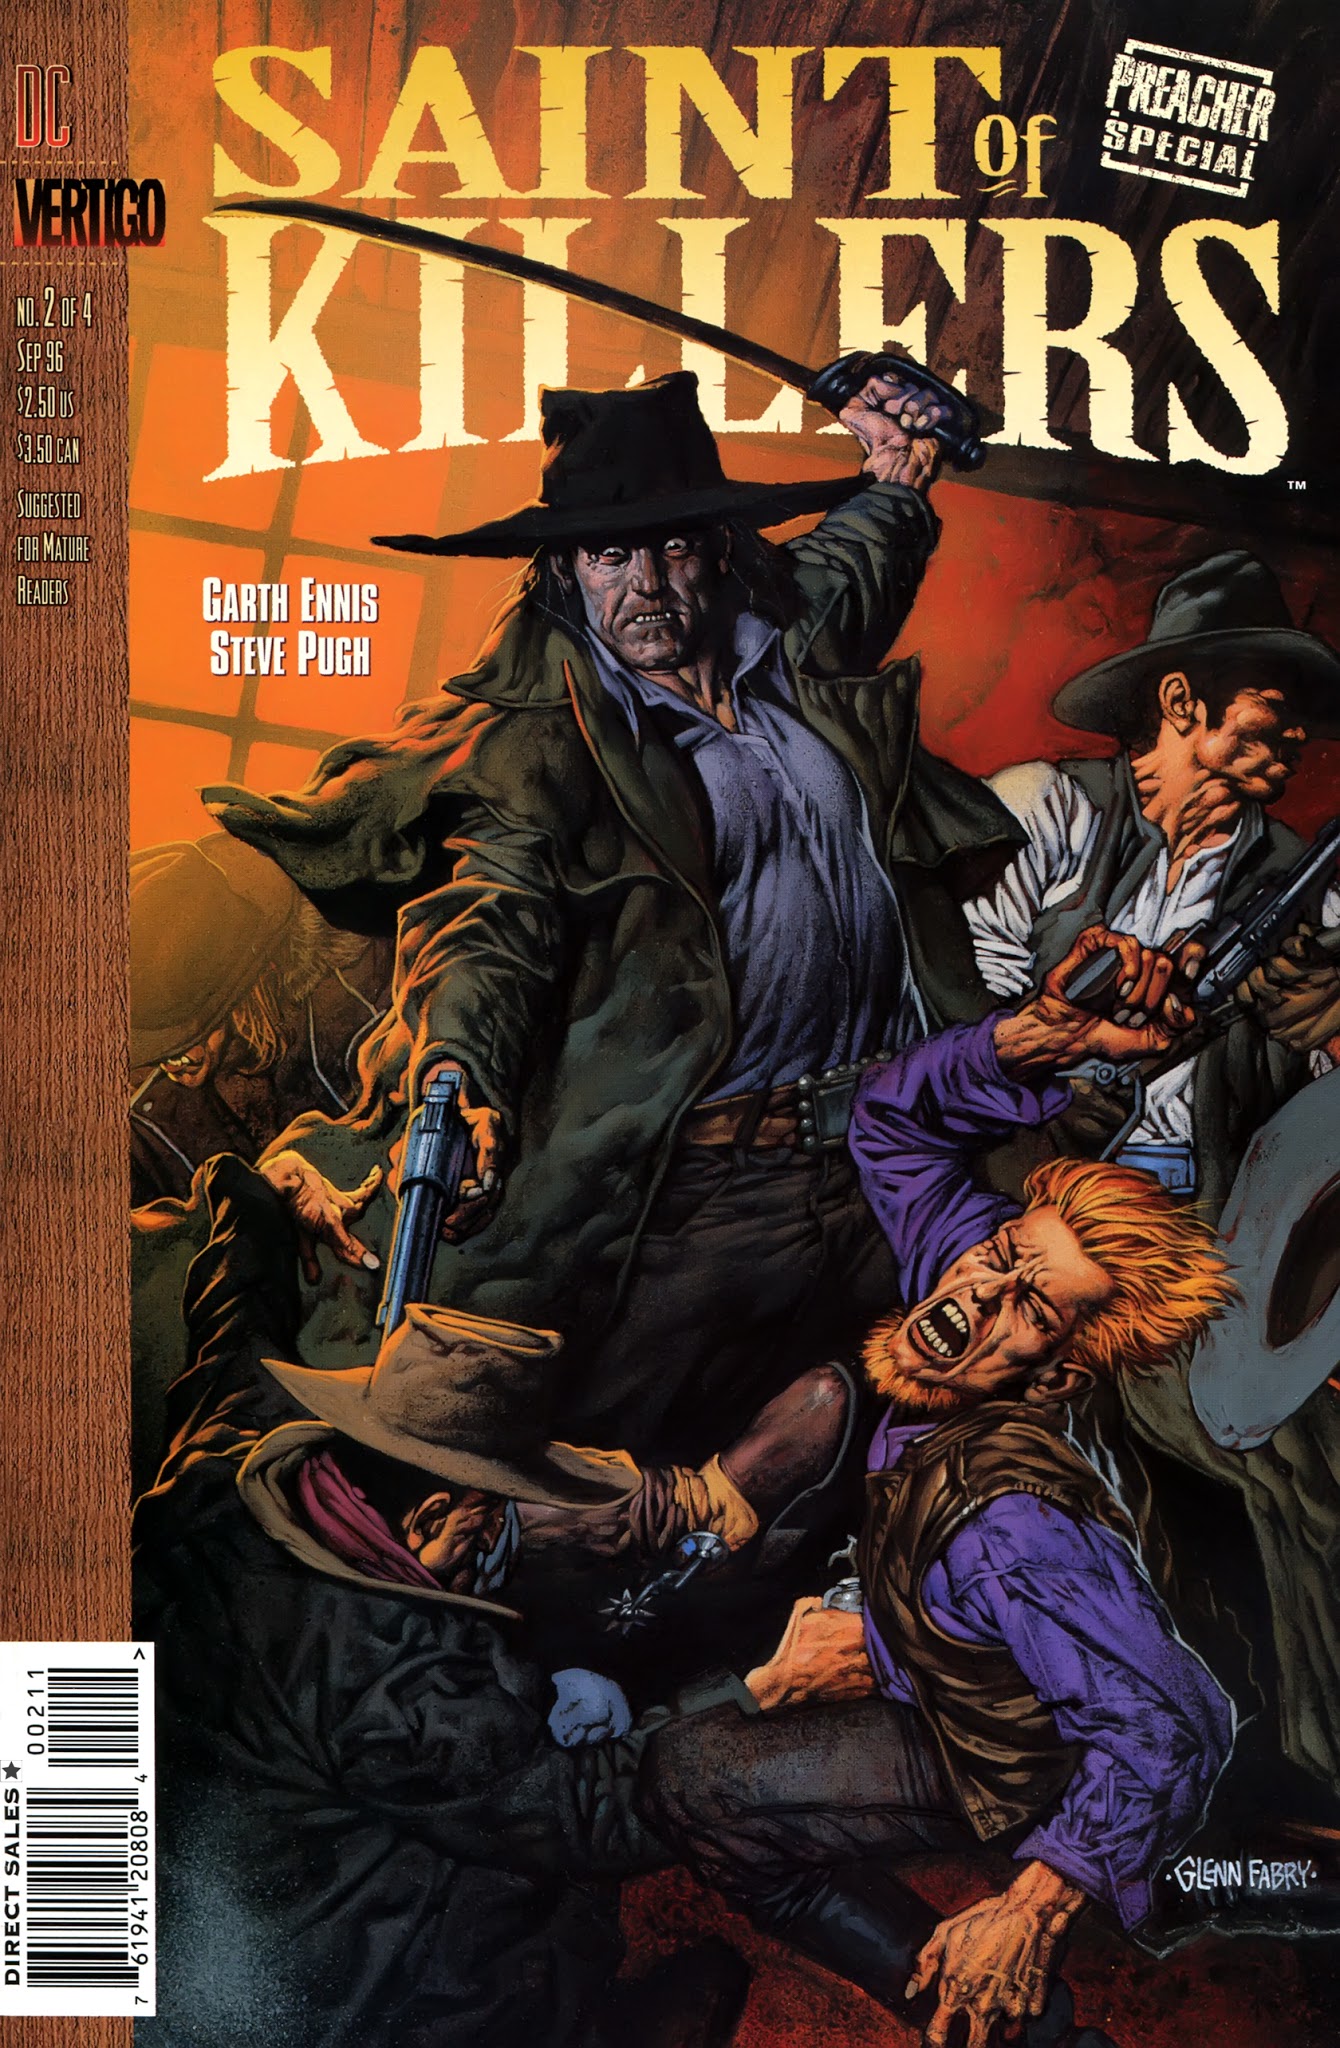 Read online Preacher Special: Saint of Killers comic -  Issue #2 - 1